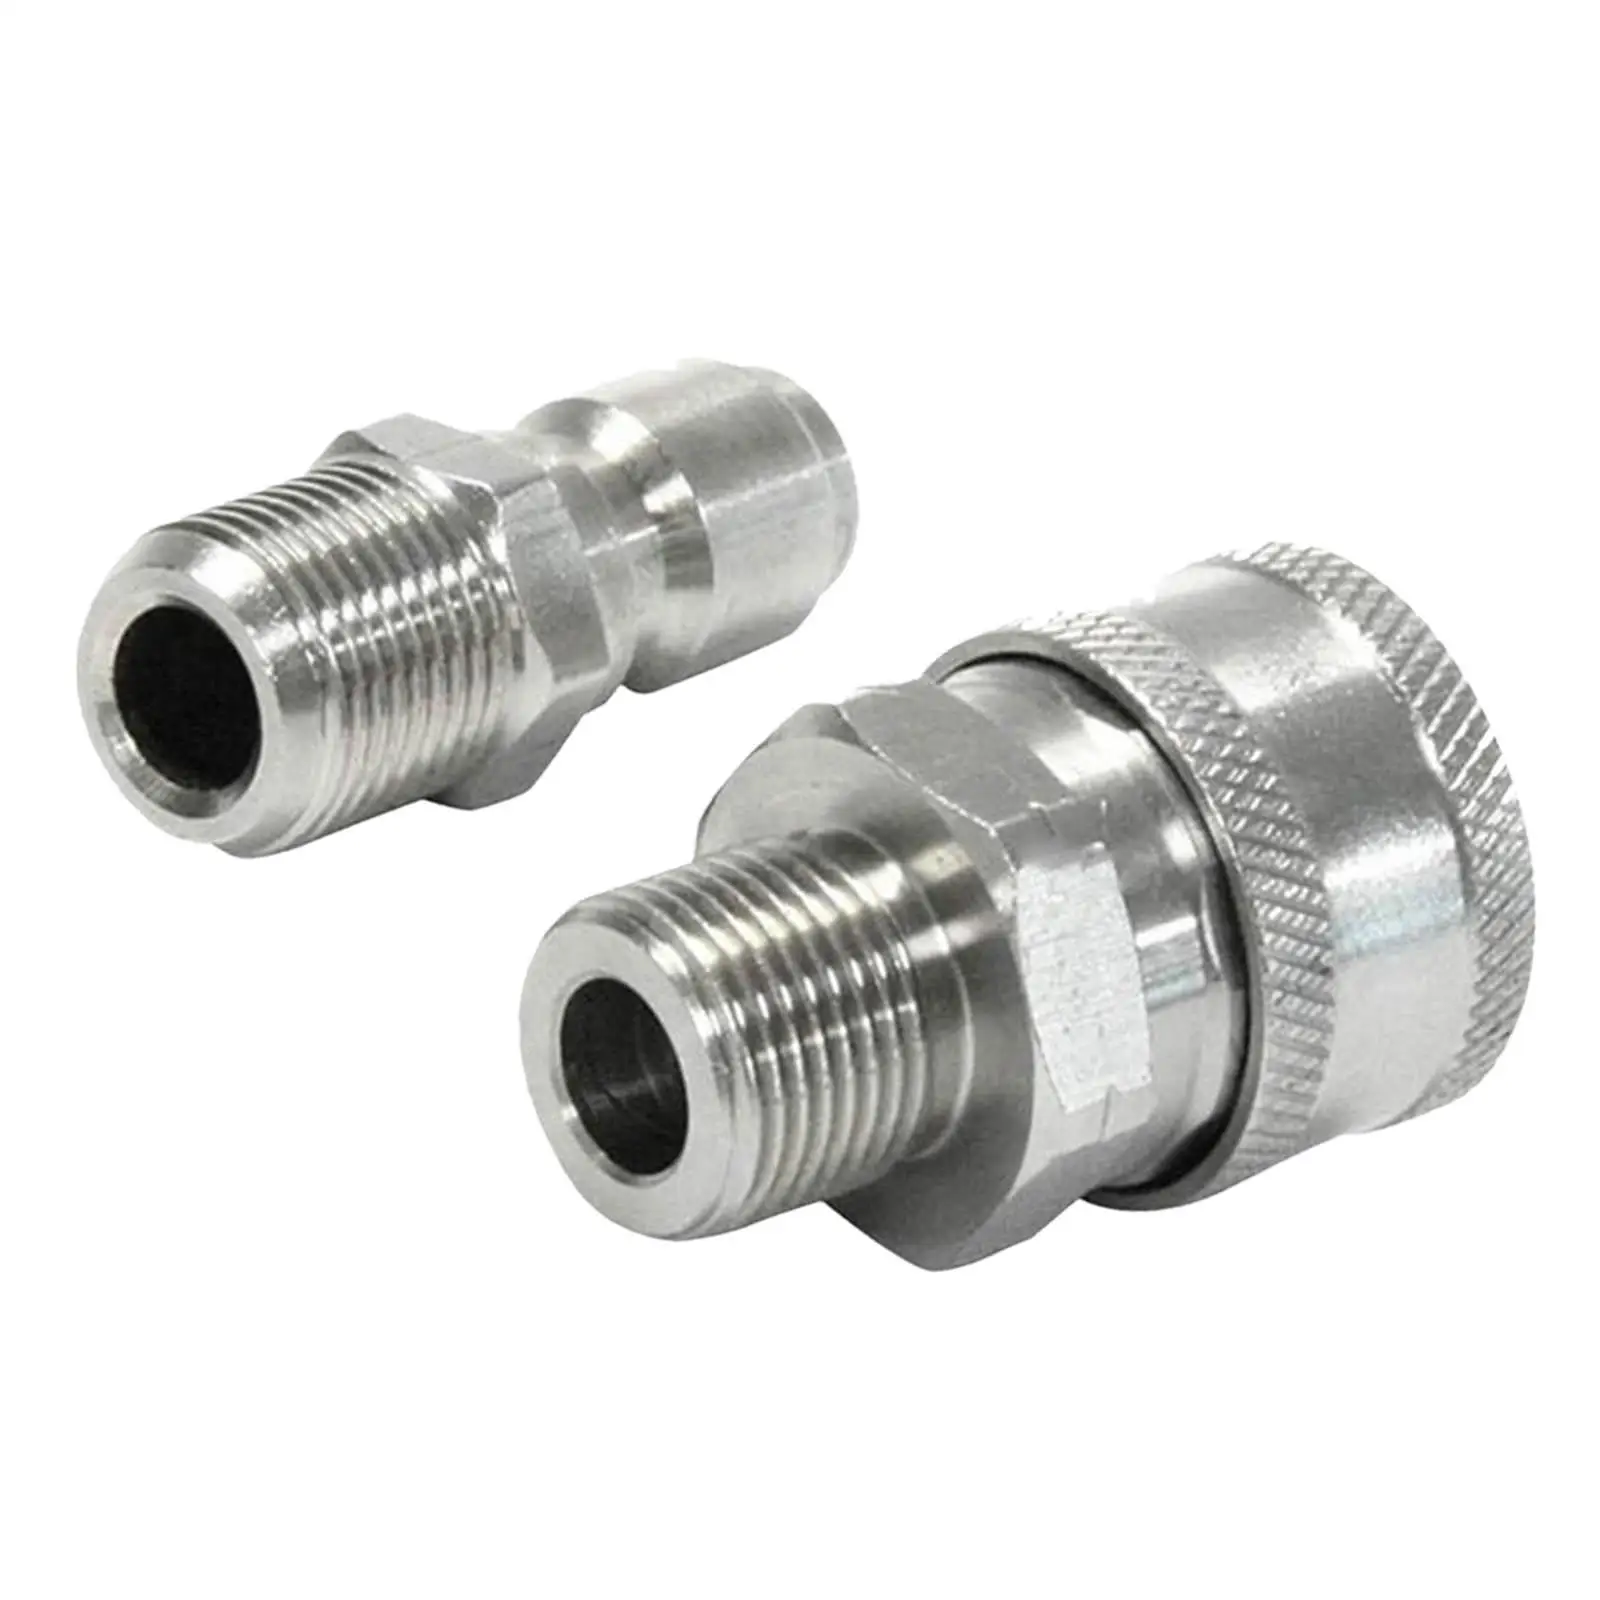 2 Pieces Pressure Washer Adapter Set 3/8 inch Hose Daily Tool Water Pump Quick Connect Kit Quick Release Connector 5000-6000 PSI